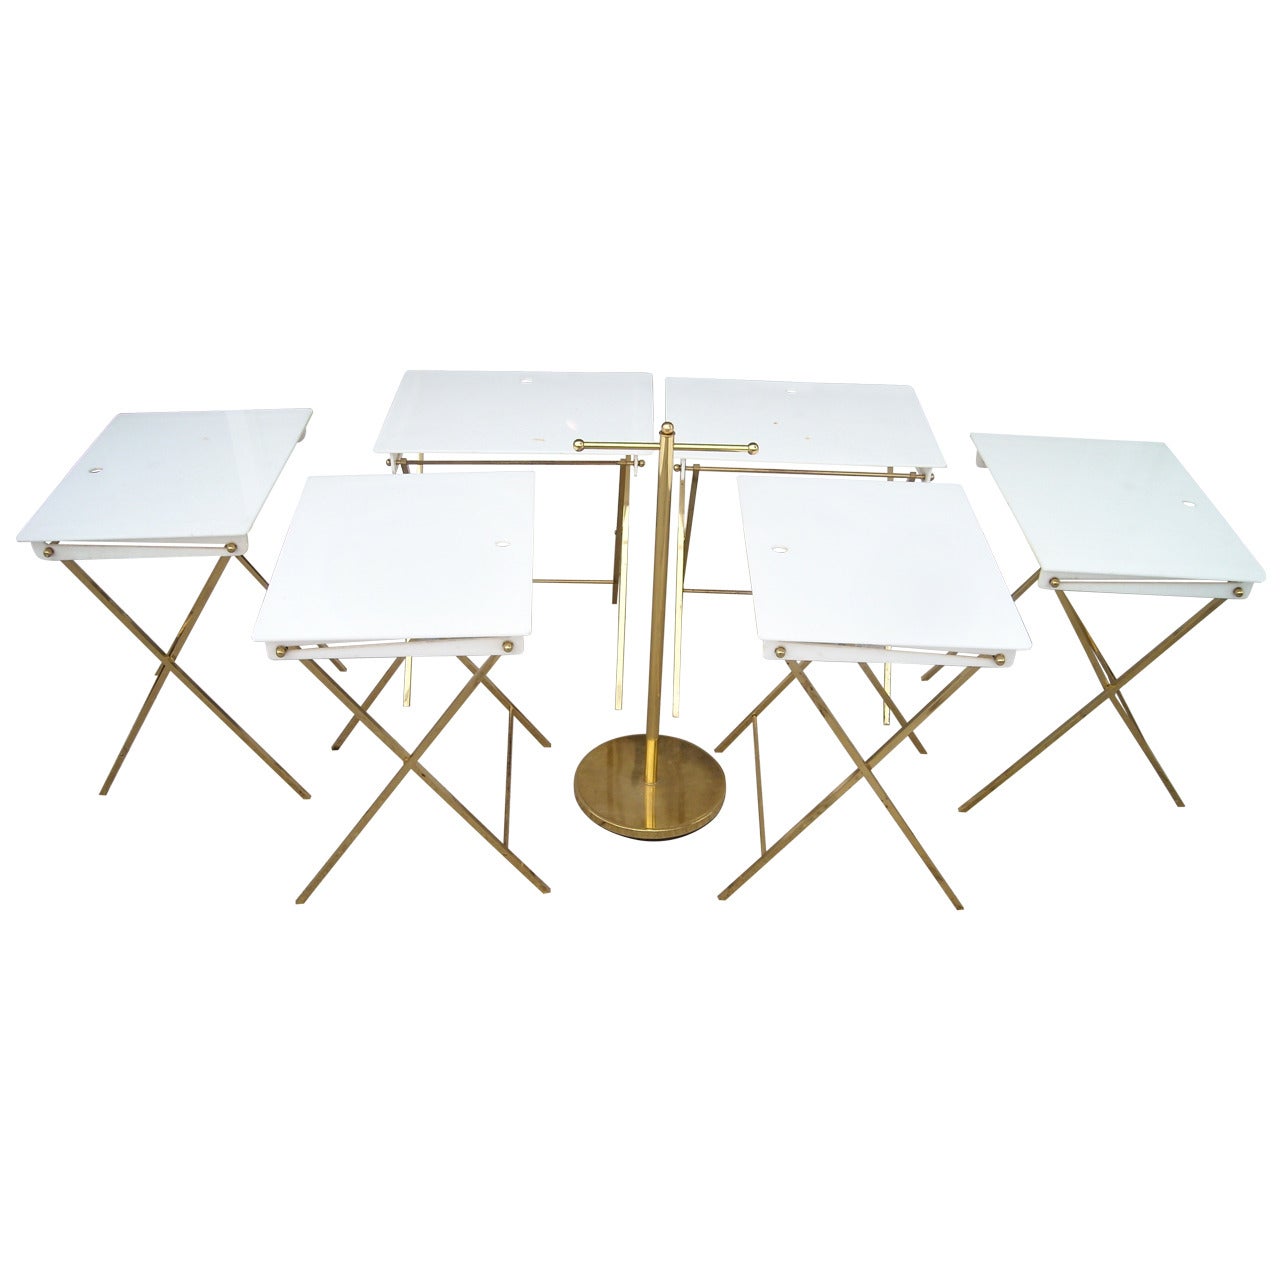 Charles Hollis Jones Set of Six Acrylic and Brass Serving Tray Tables and Stand